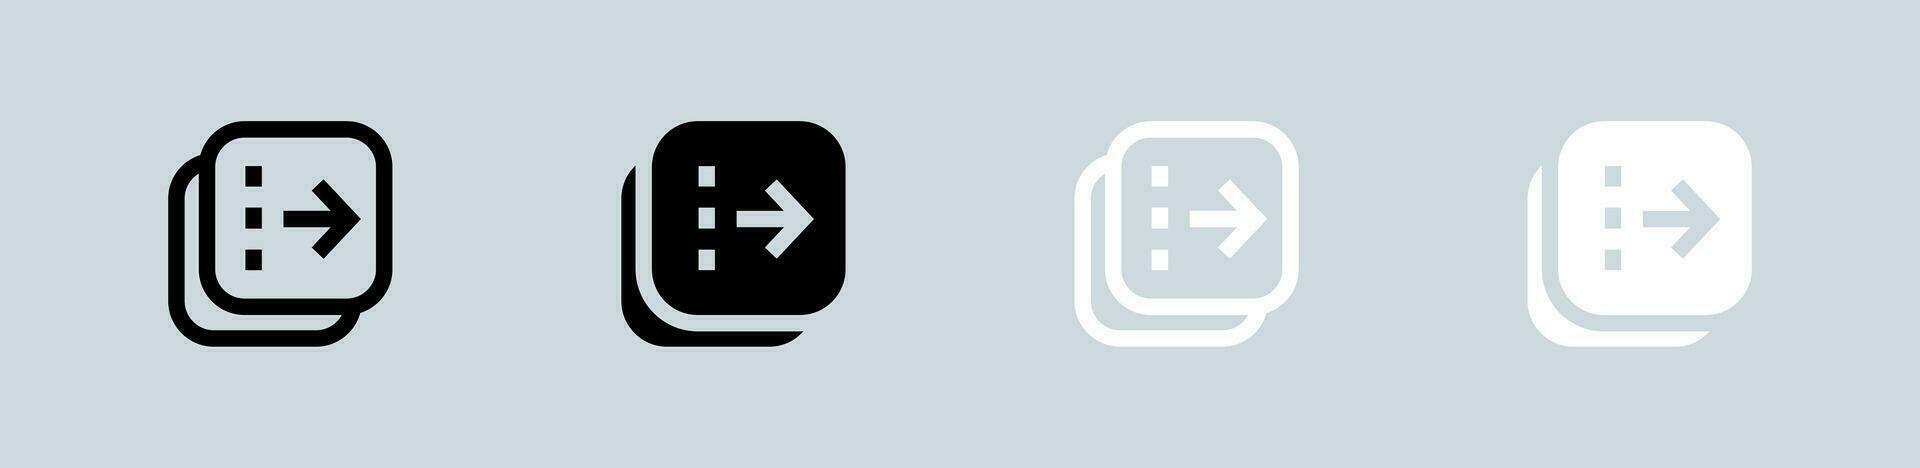 Flip icon set in black and white. Arrow switch signs vector illustration.